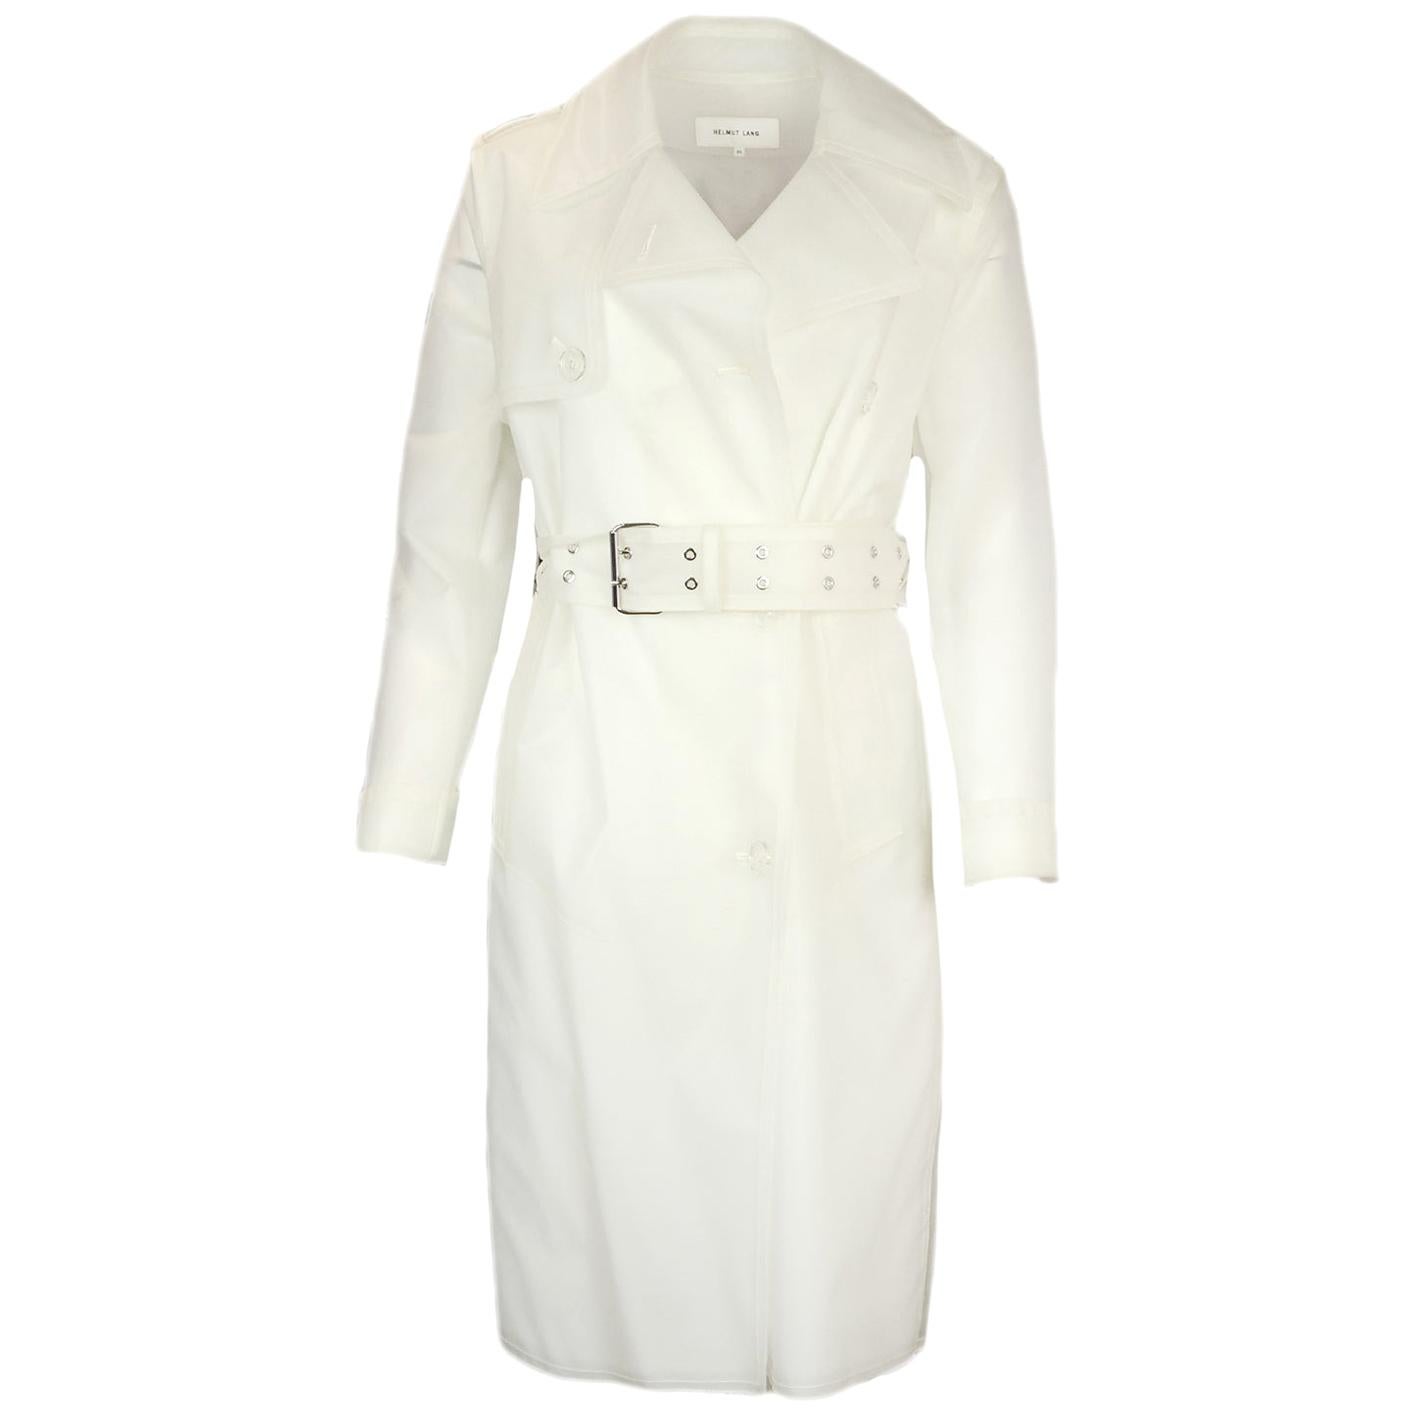 Helmut Lang Transparent PVC Double Breasted Trench Coat with Belt sz XS